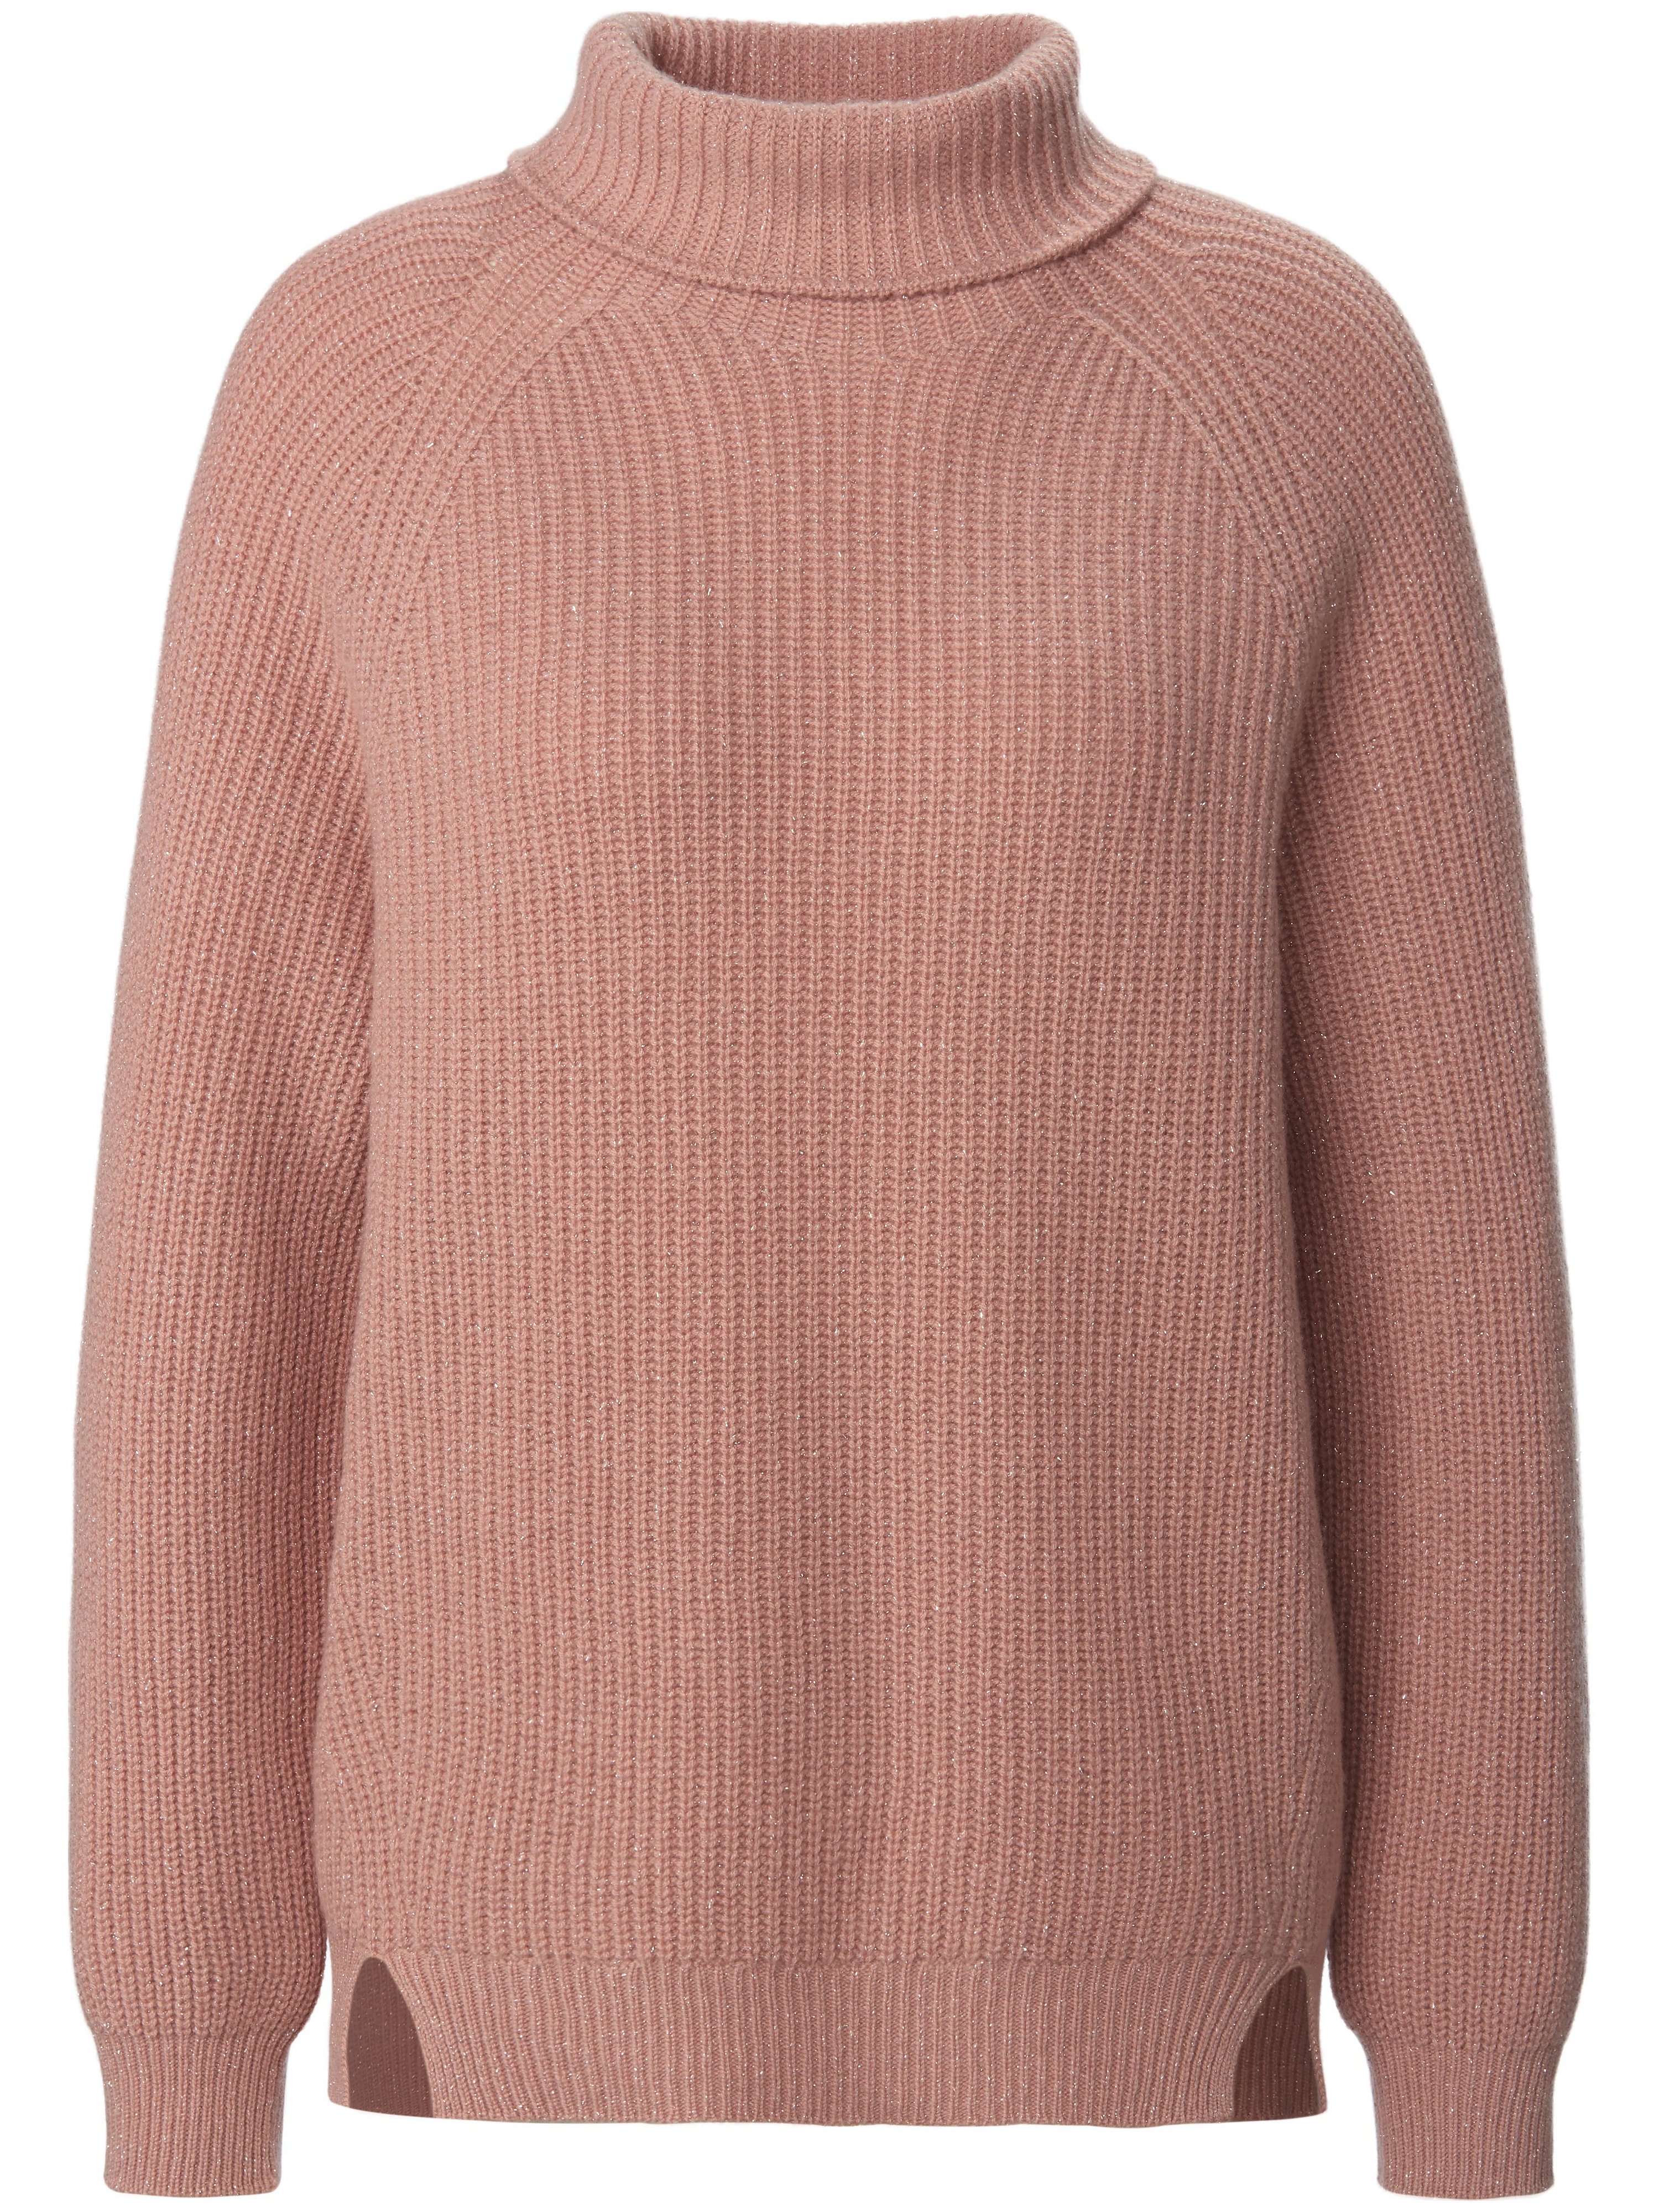 Le pull manches longues raglan  include rose